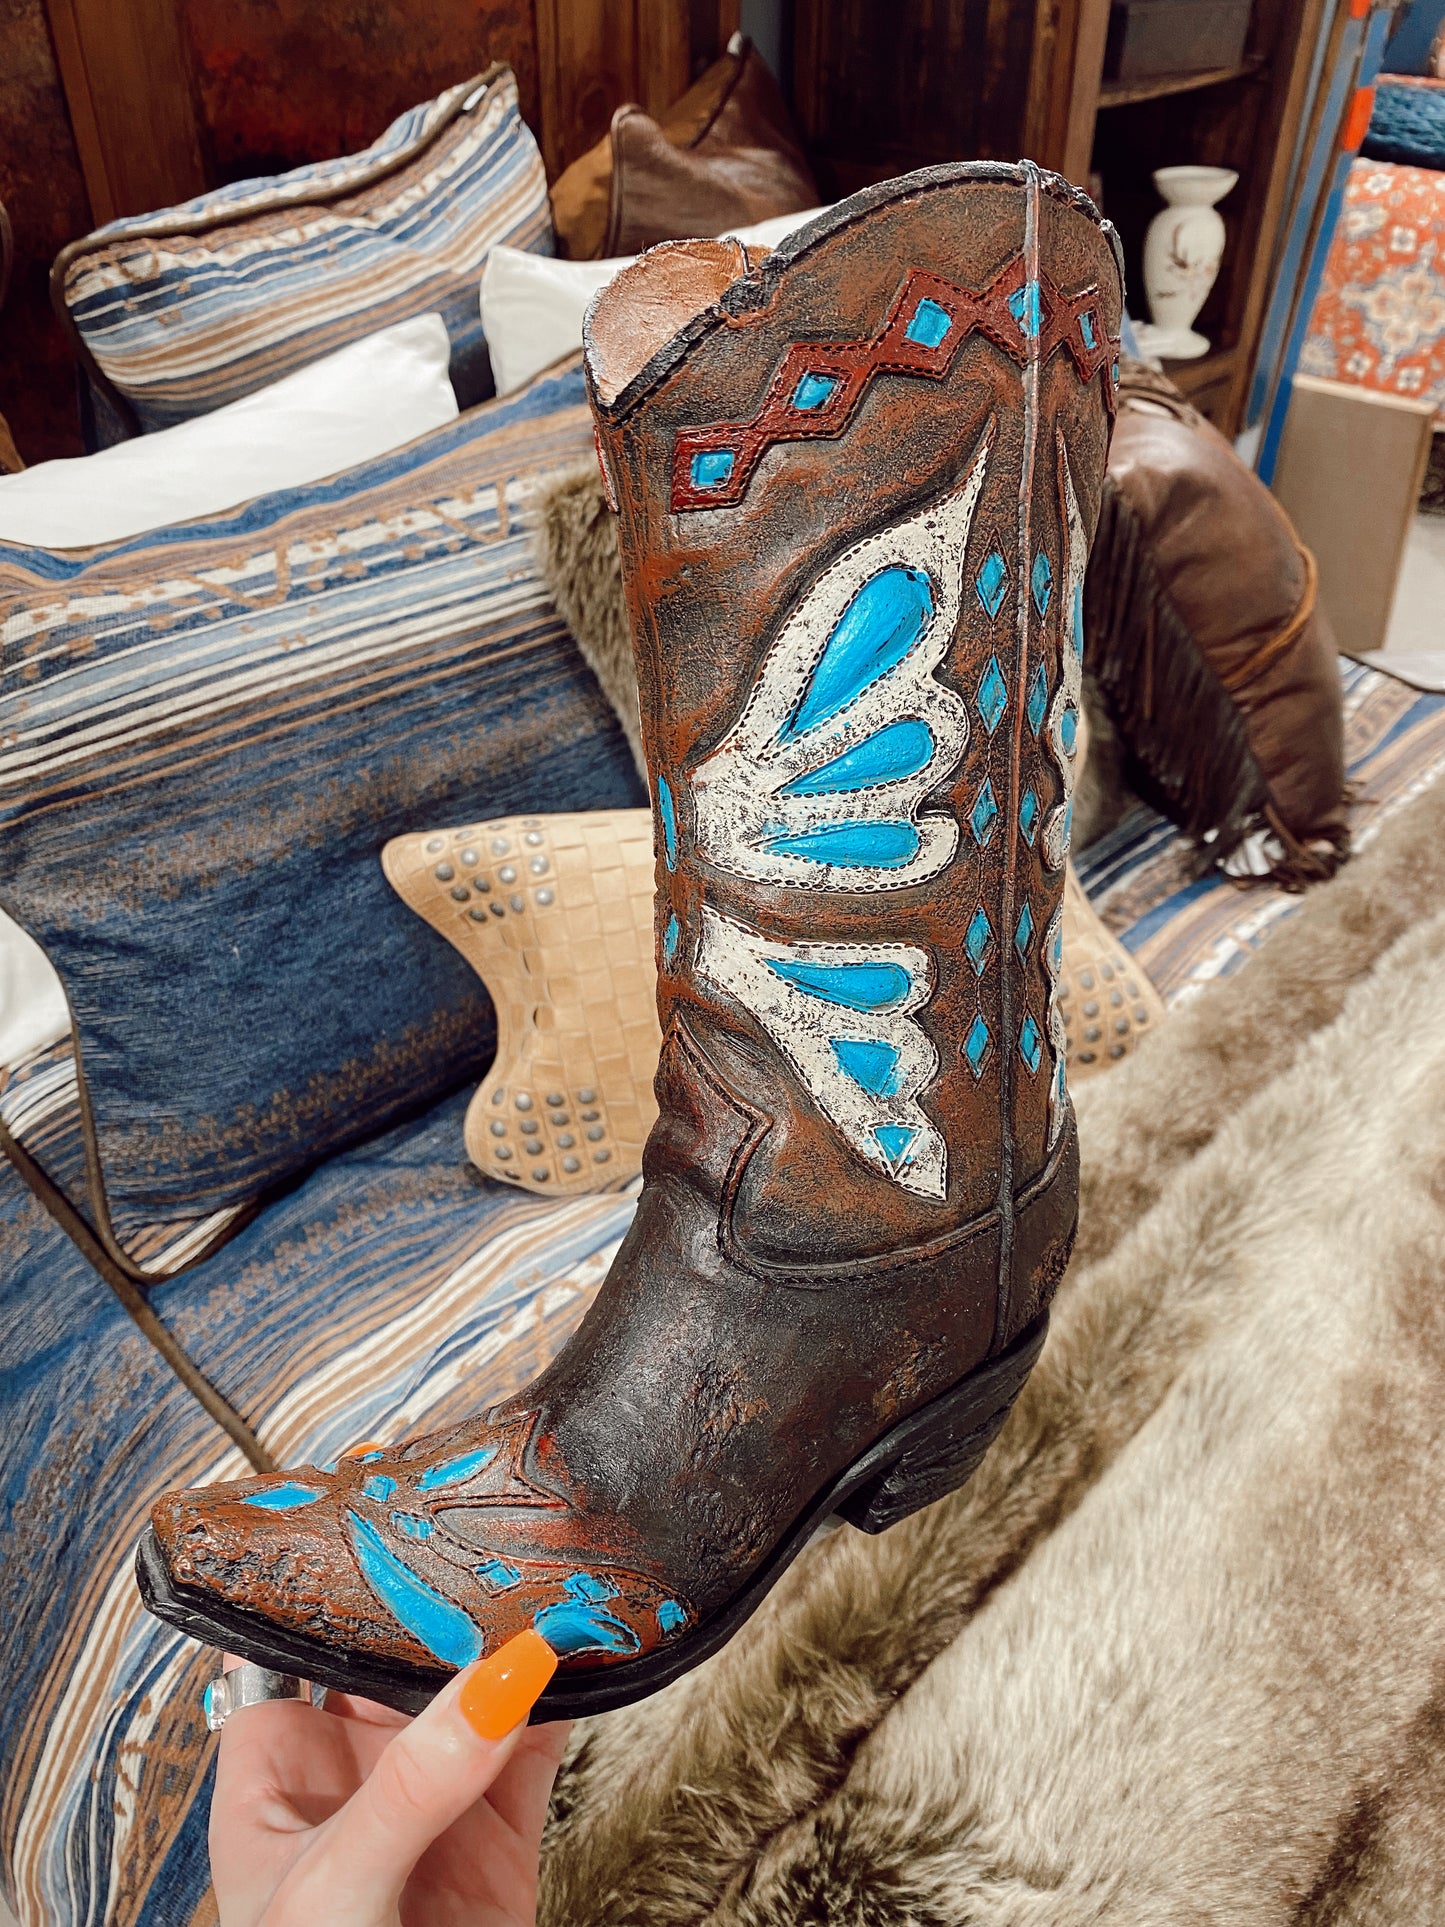 The Turquoise Butterfly Cowboy Boot Vase